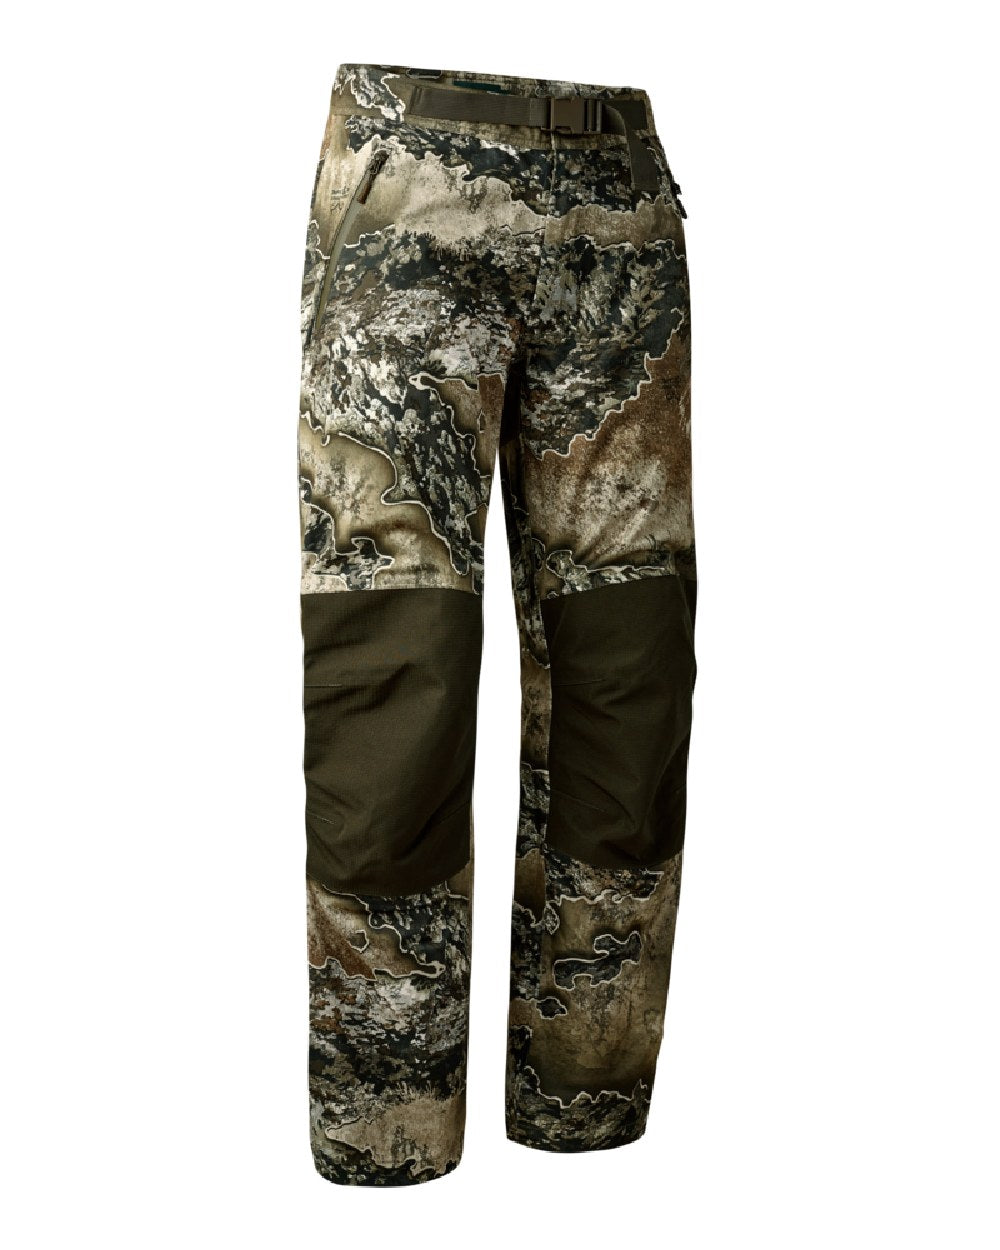 Deerhunter Excape Rain Trousers in REALTREE EXCAPE 